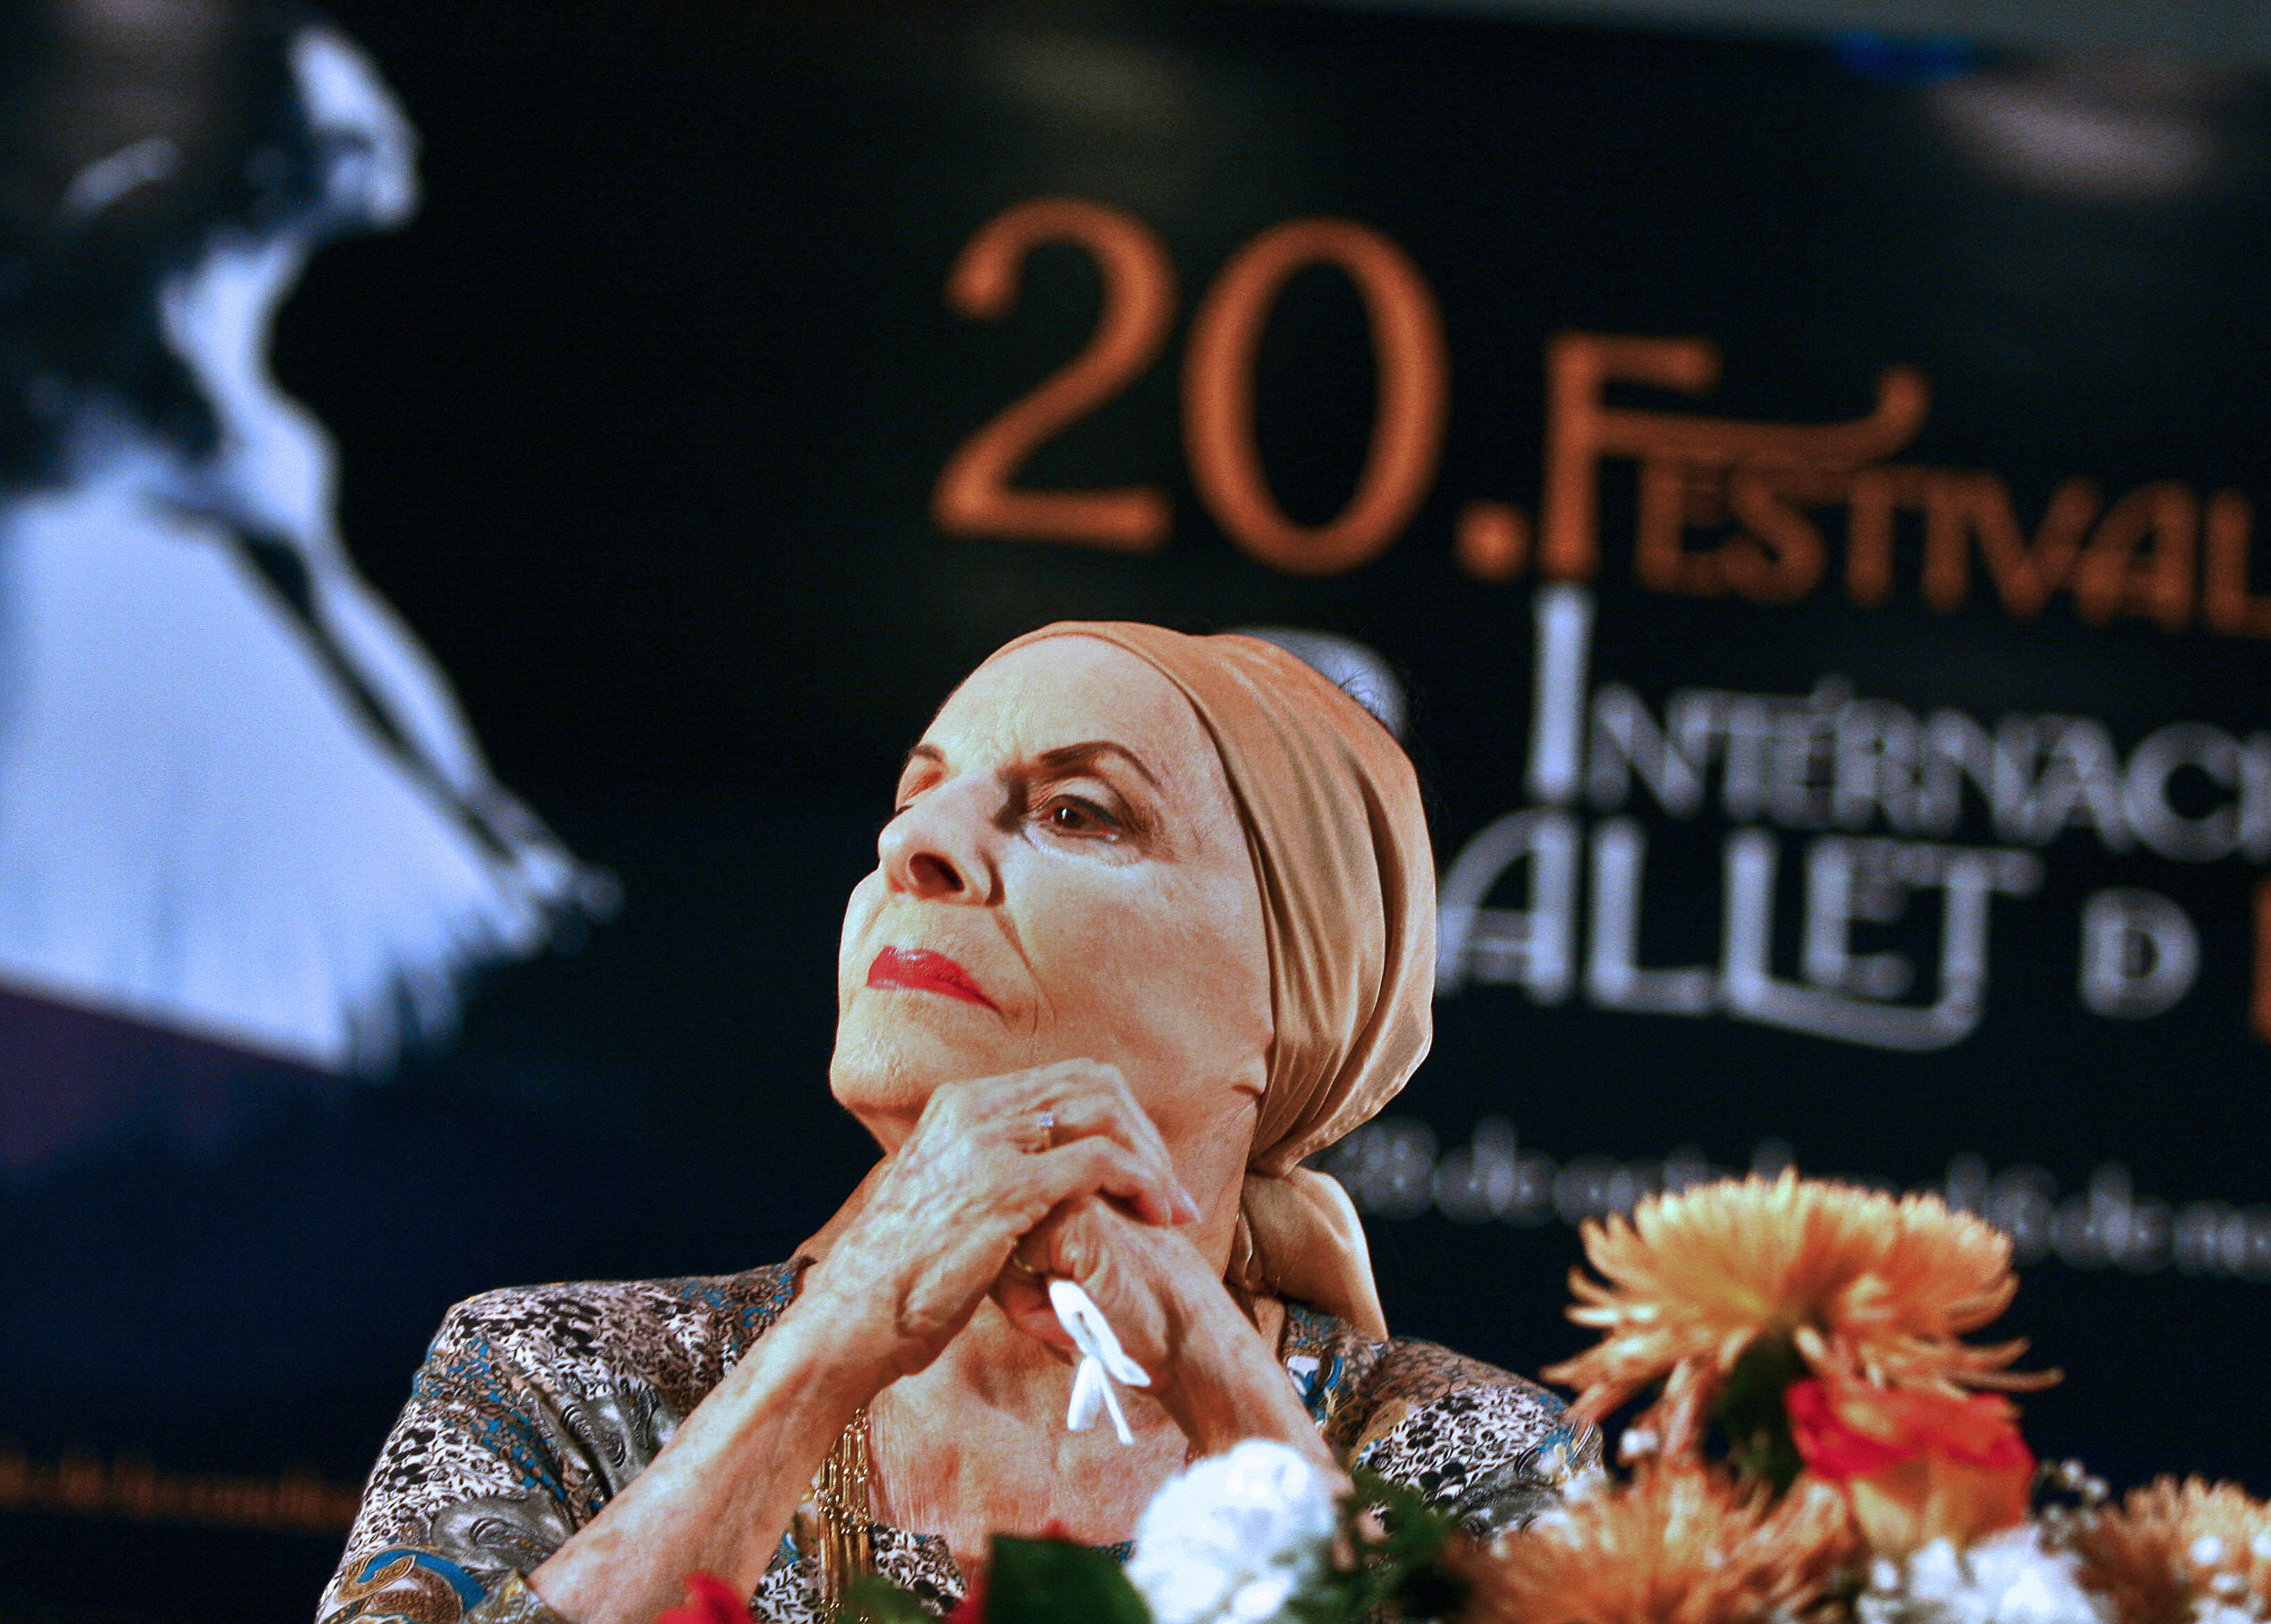 LA HABANA, CUBA:  Dancer Alicia Alonso, Director of the National Ballet of Cuba, answers questions during a press conference to announce the program of the XX Havana's Ballet Festival, that will be held from next 28 October to 6 November.  AFP PHOTO/Adalberto ROQUE  (Photo credit should read ADALBERTO ROQUE/AFP via Getty Images)